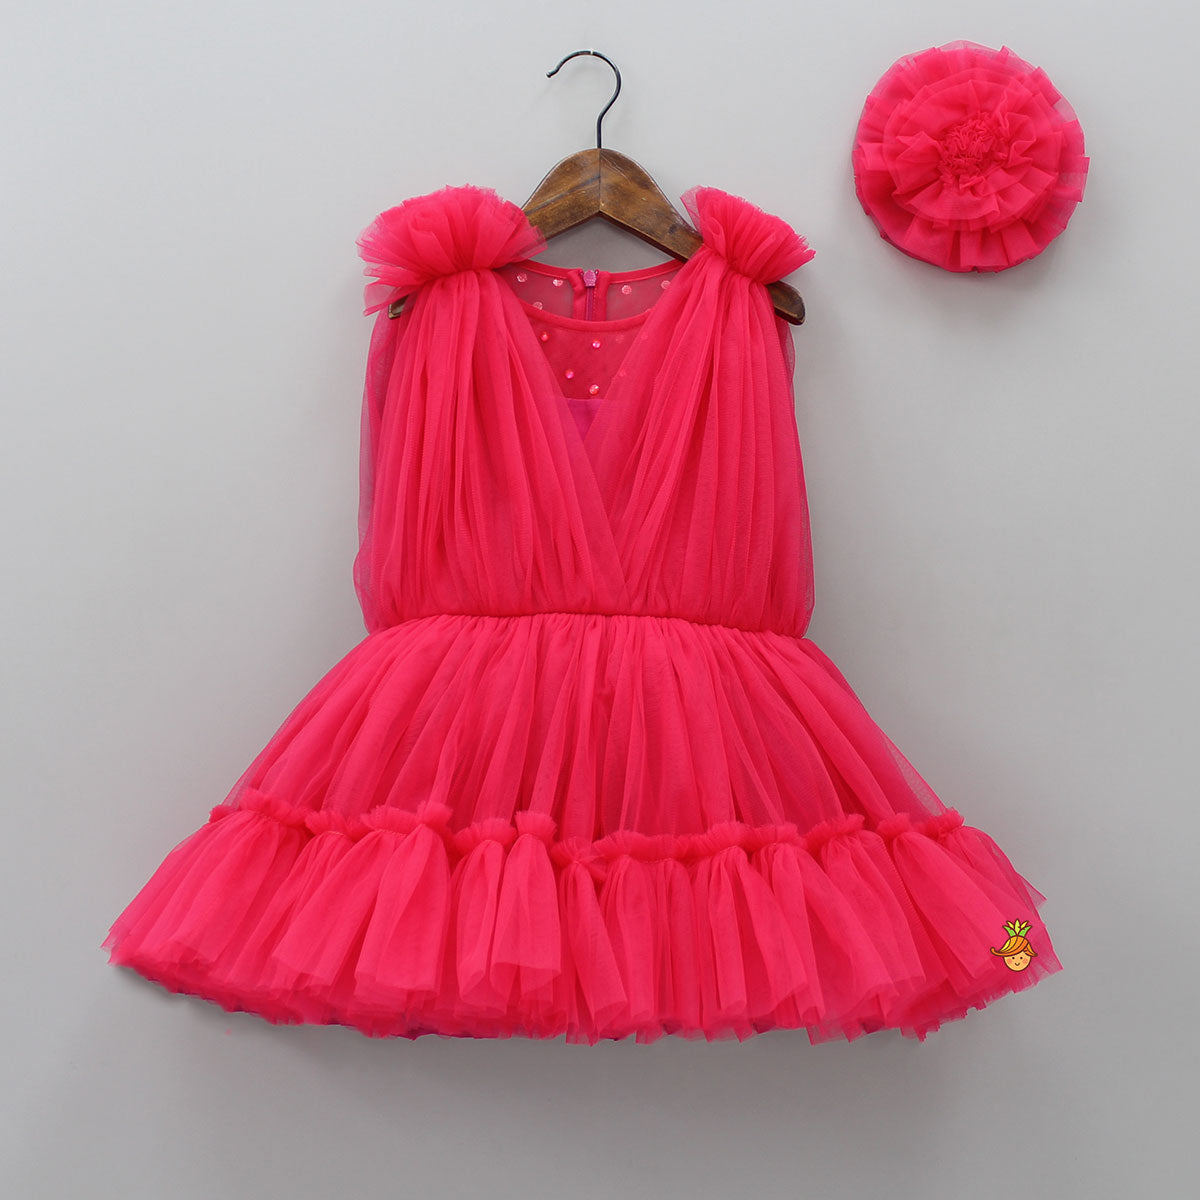 Enchanting Crimson Red Gathered Dress With Hair Clip